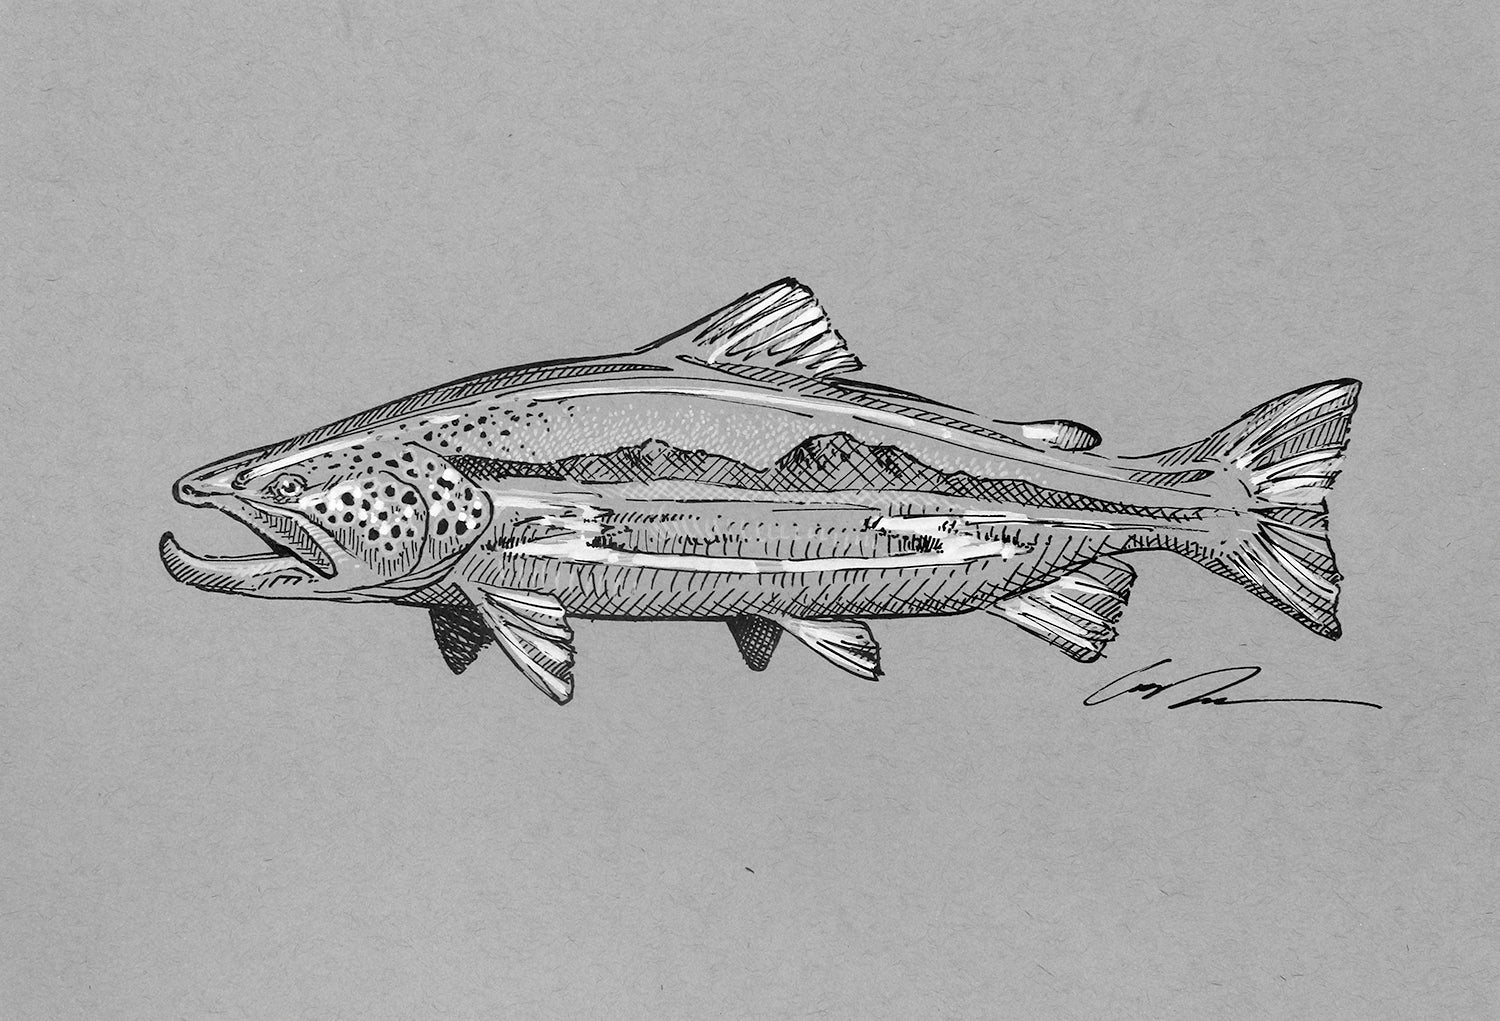 A black and white sketch of a brown trout with a spring creek inside of it on gray paper